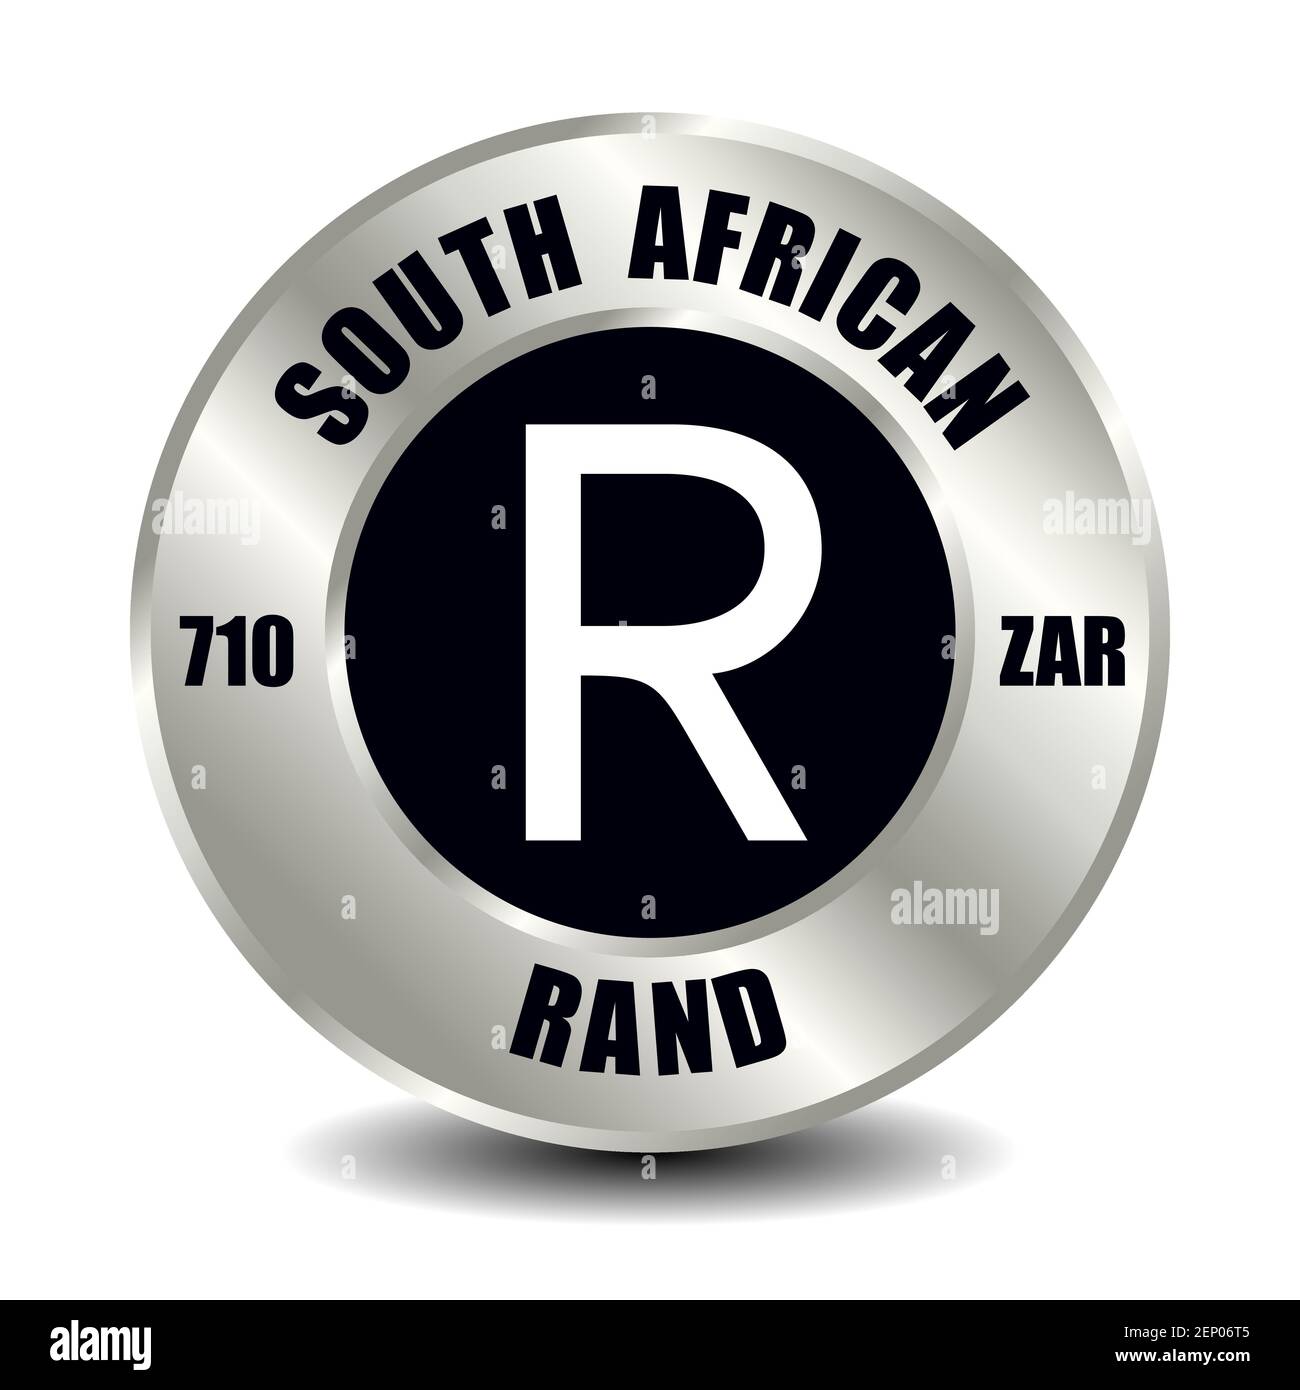 South Africa money icon isolated on round silver coin. Vector sign of currency symbol with international ISO code and abbreviation Stock Vector